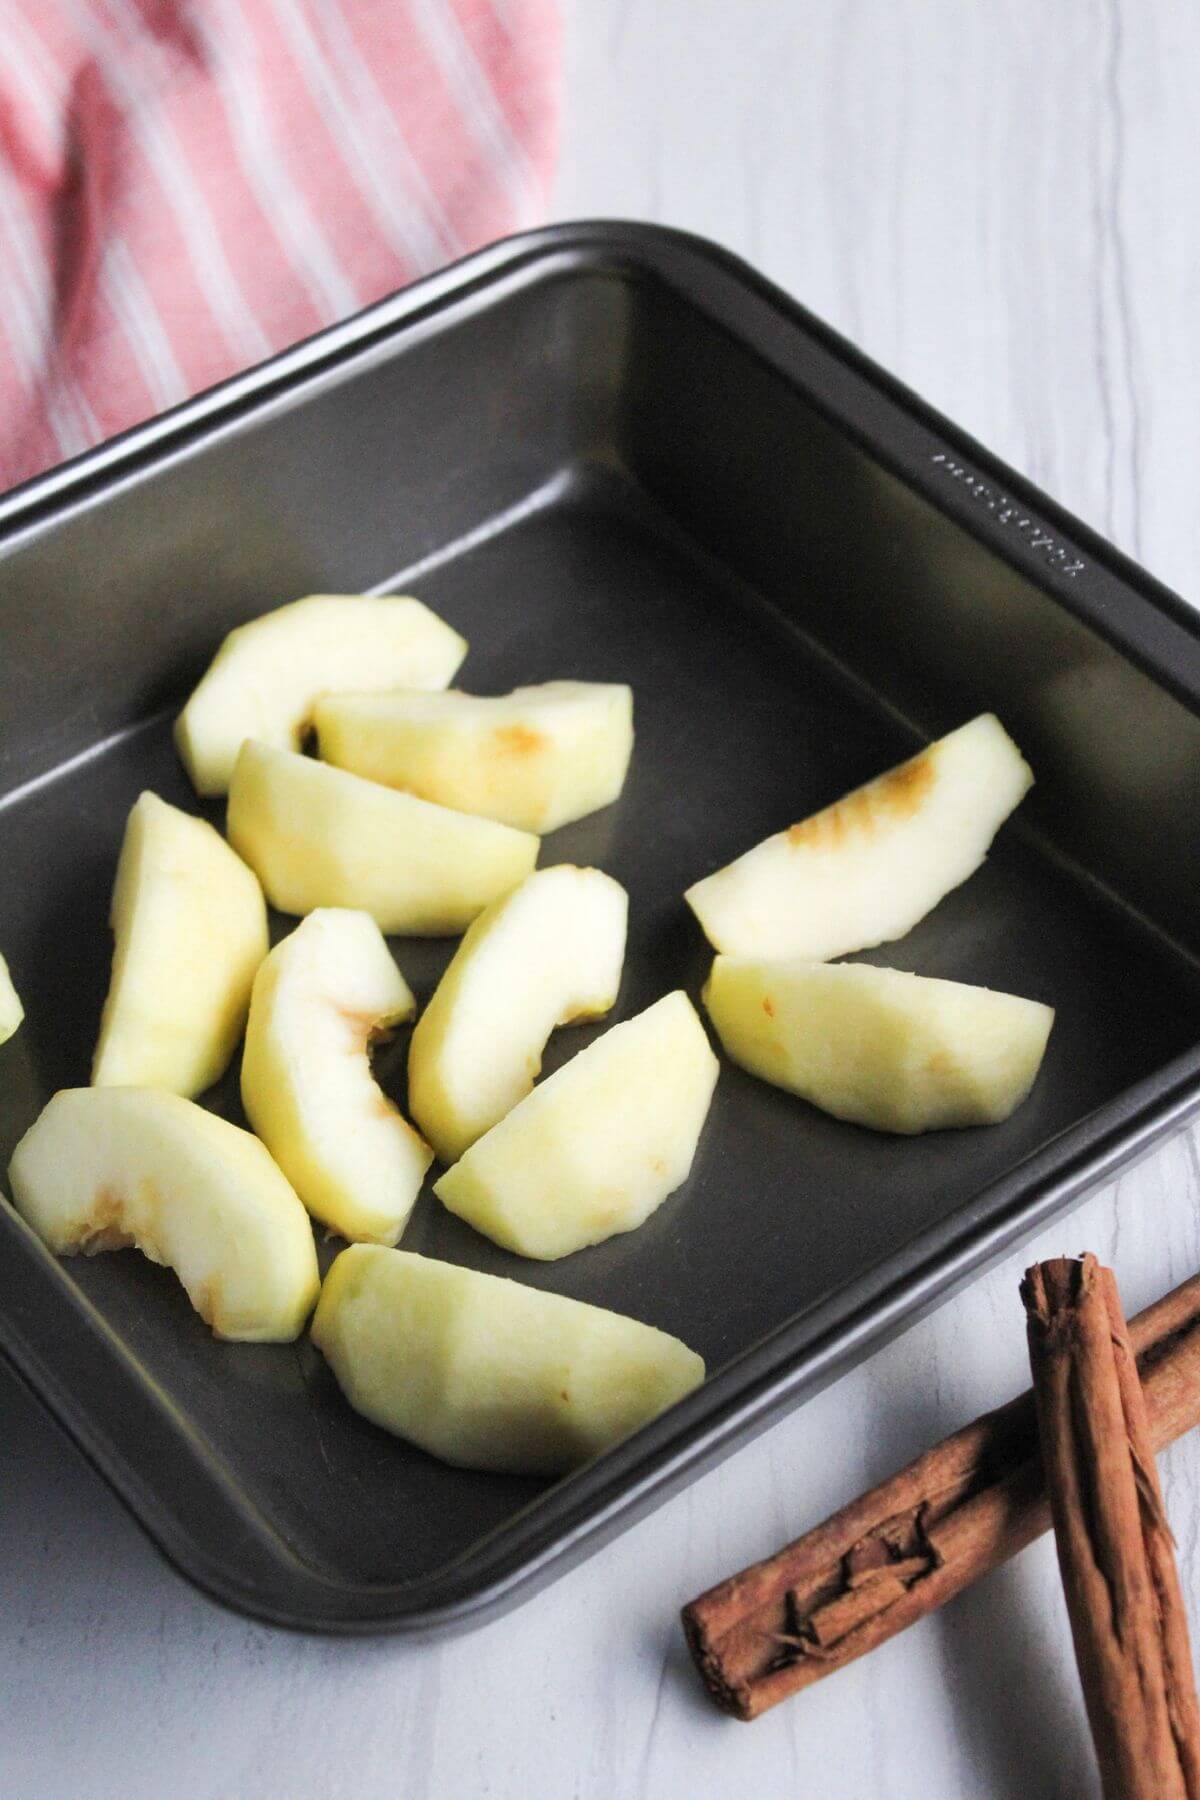 Apple slices in square baking dish.